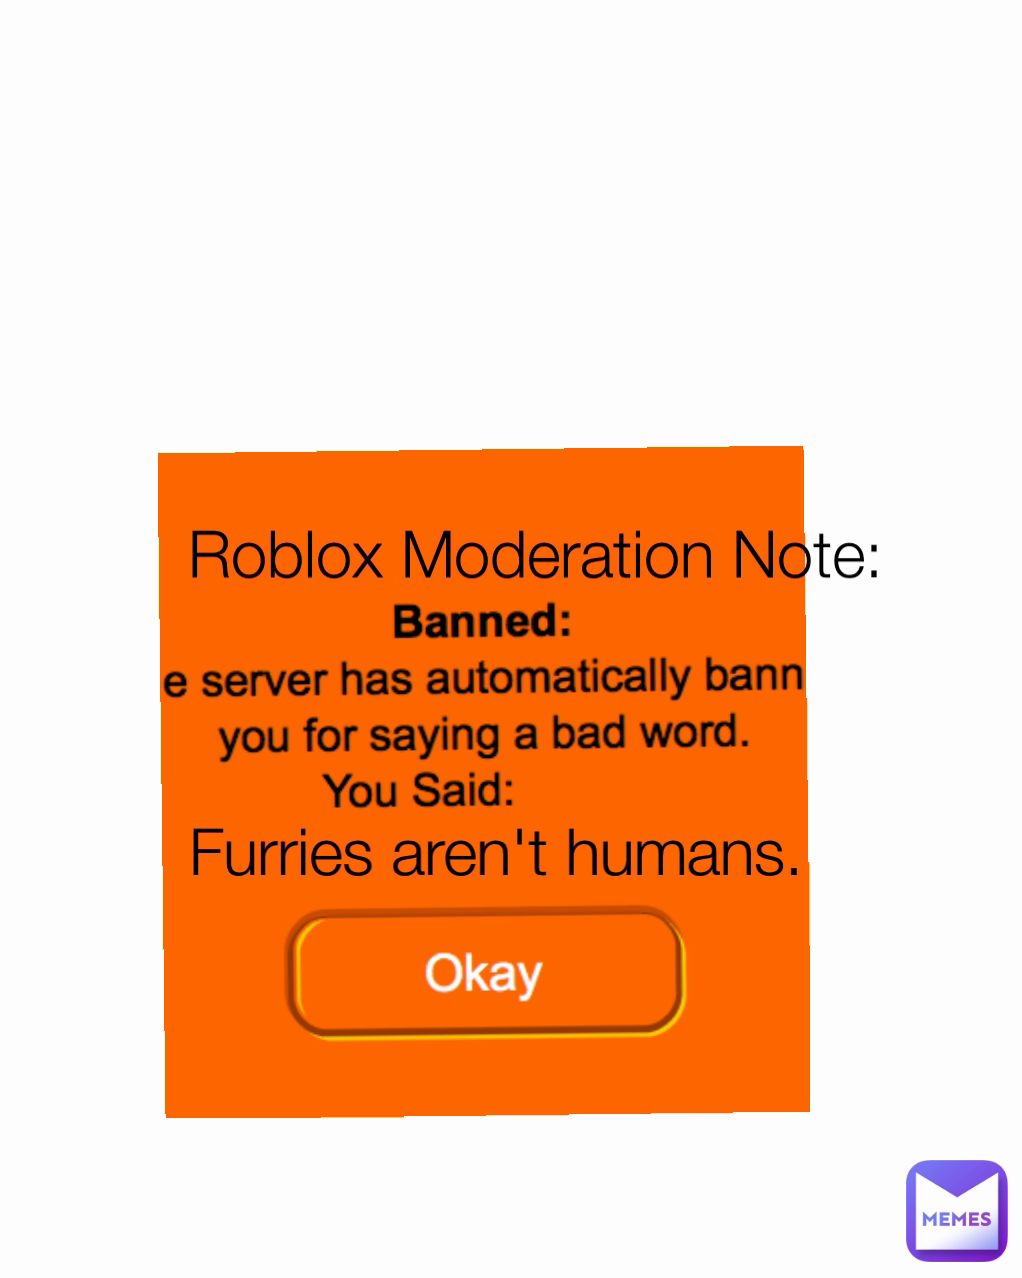 Roblox Moderation Note:

 Furries aren't humans.